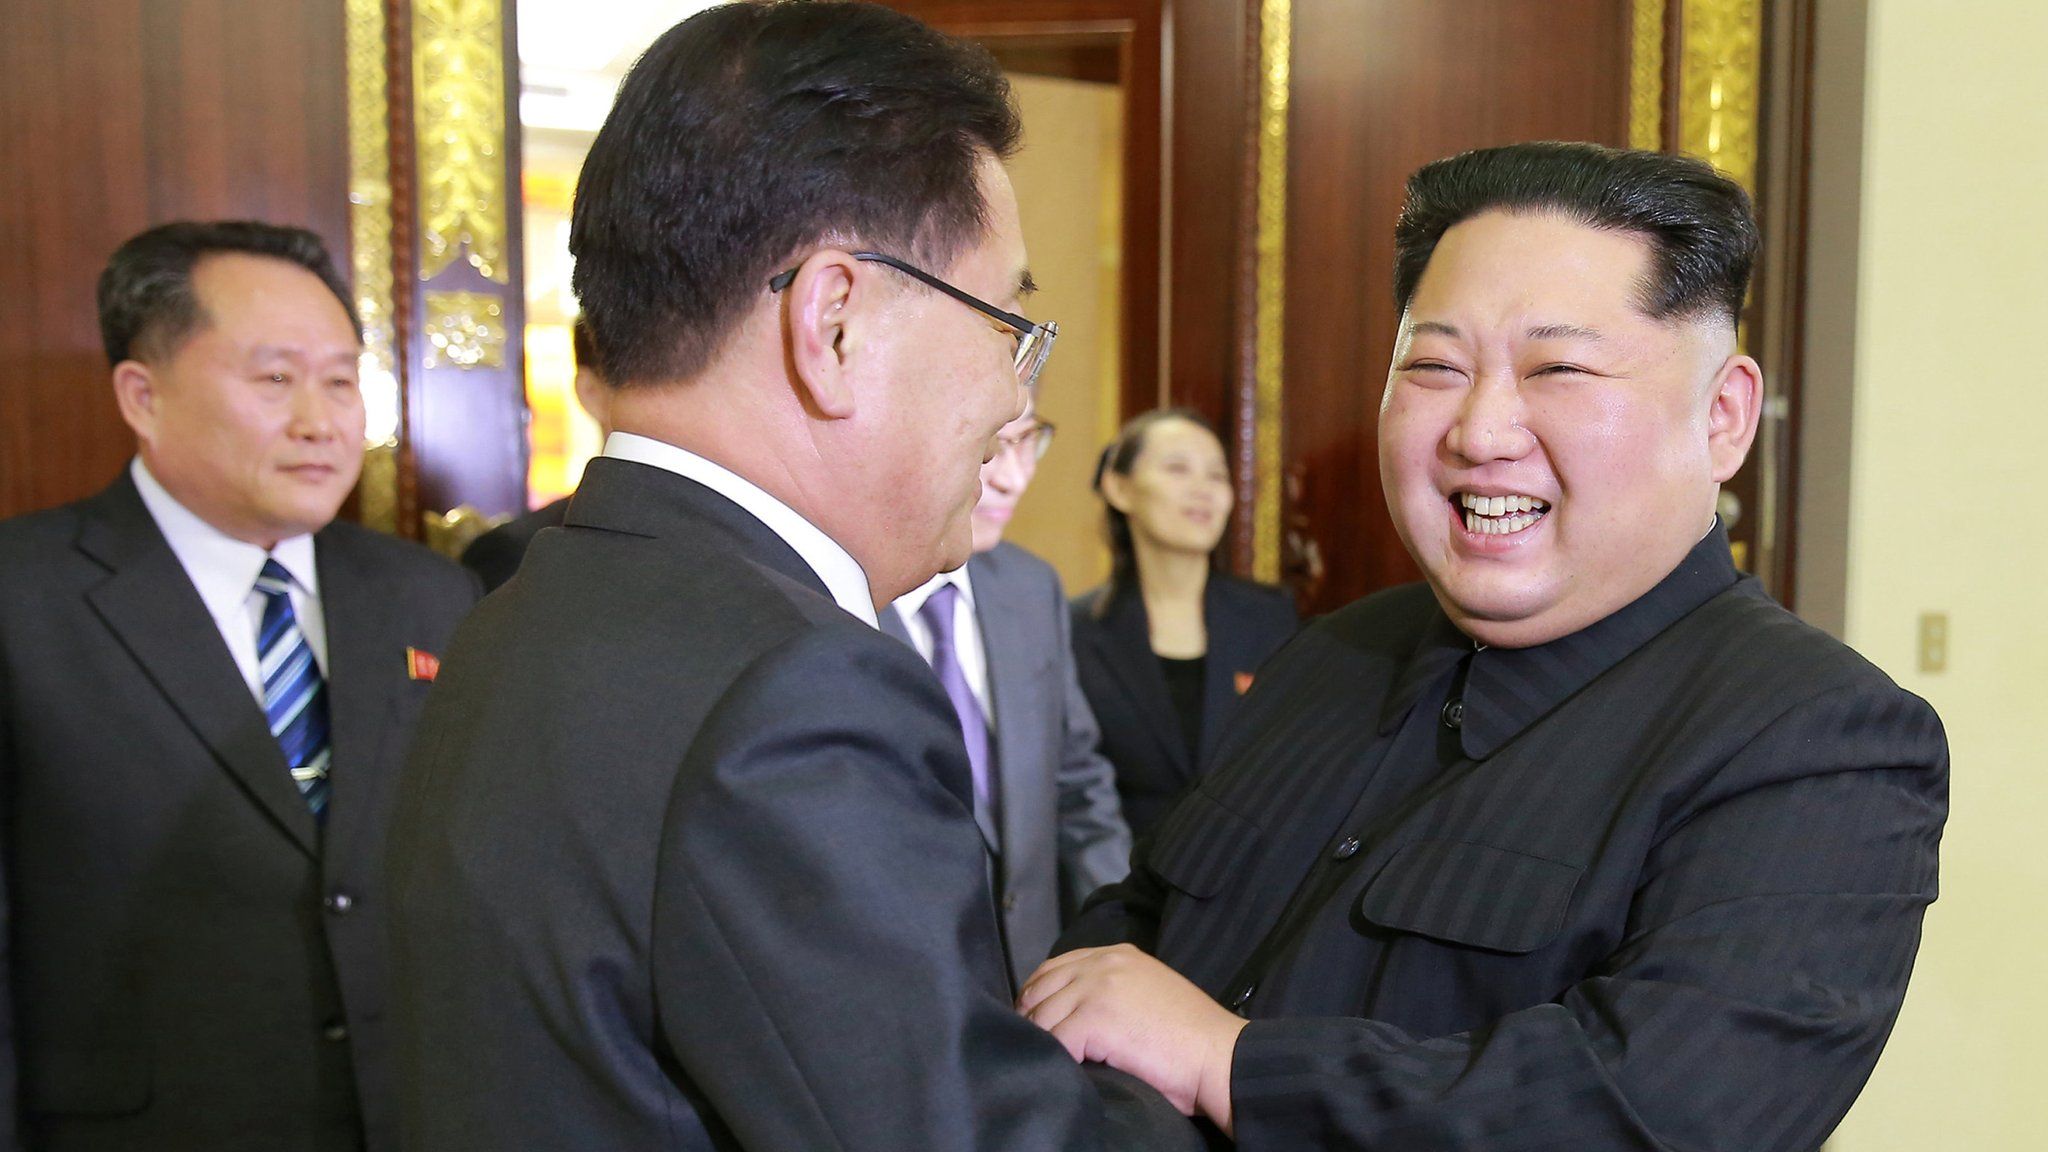 North Korean leader Kim Jong-un greets a member of the delegation of South Korea's president on March 6, 2018